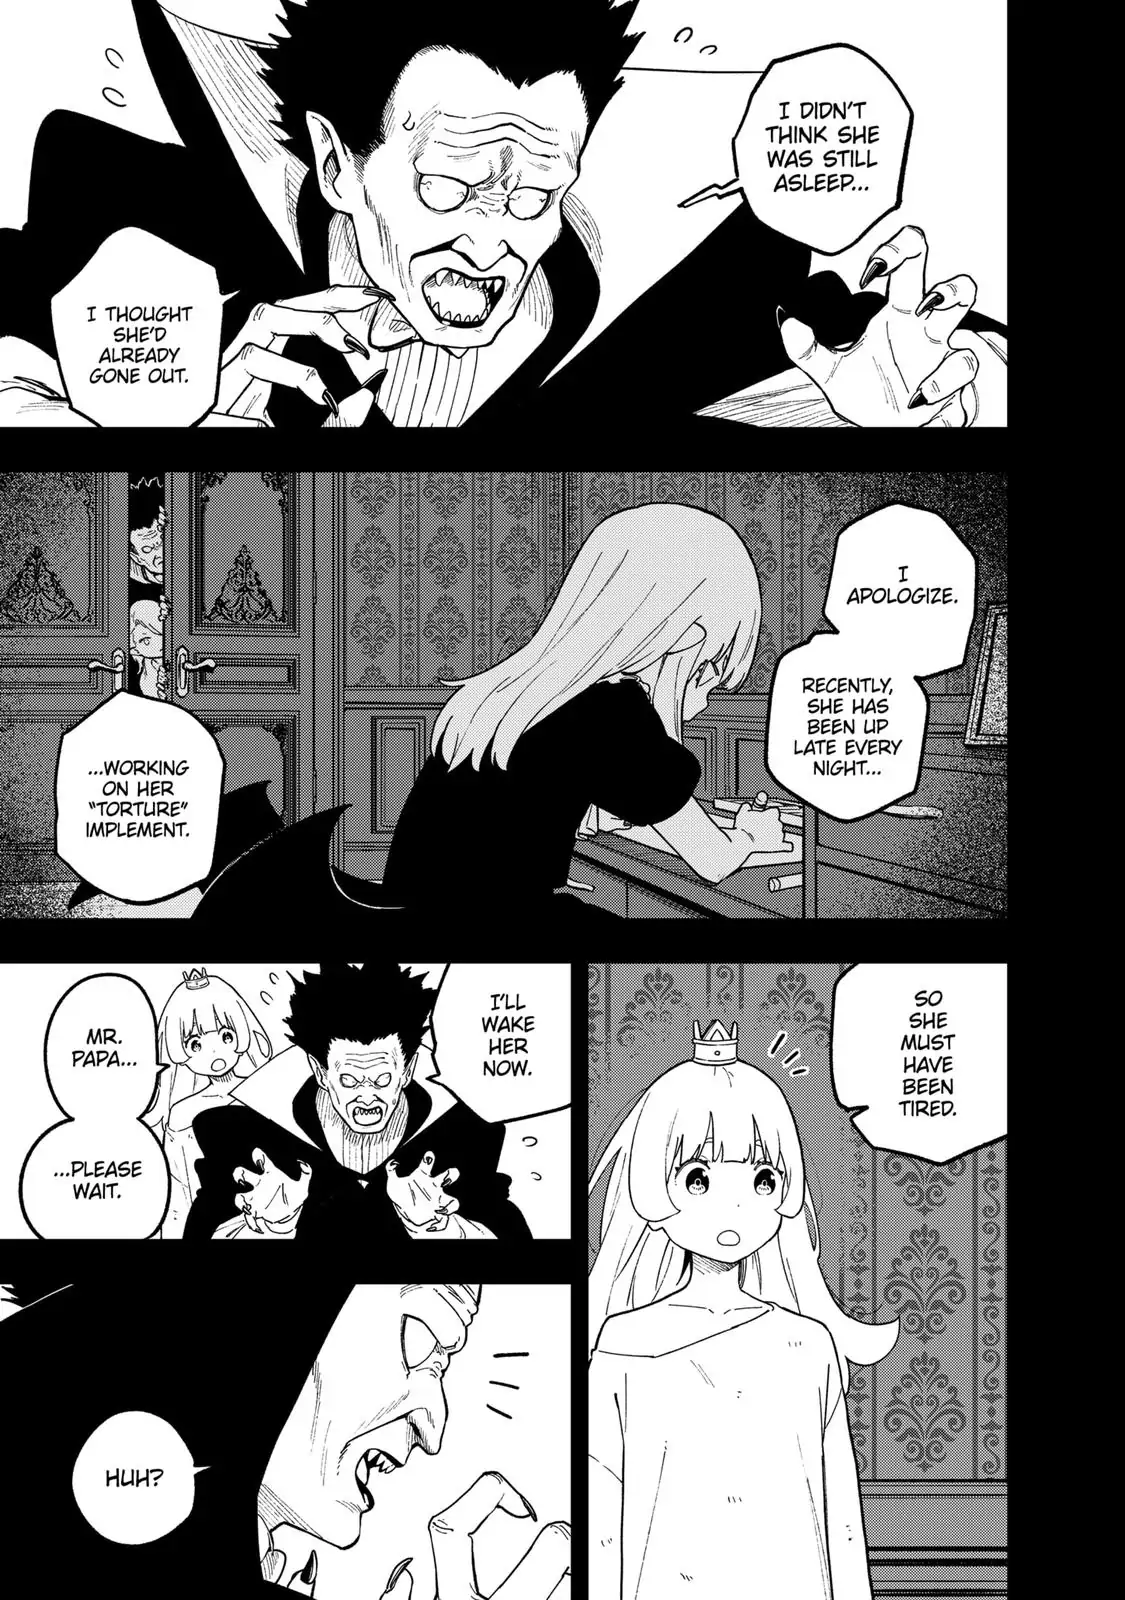 It's Time for "Interrogation", Princess! - chapter 178 - #5